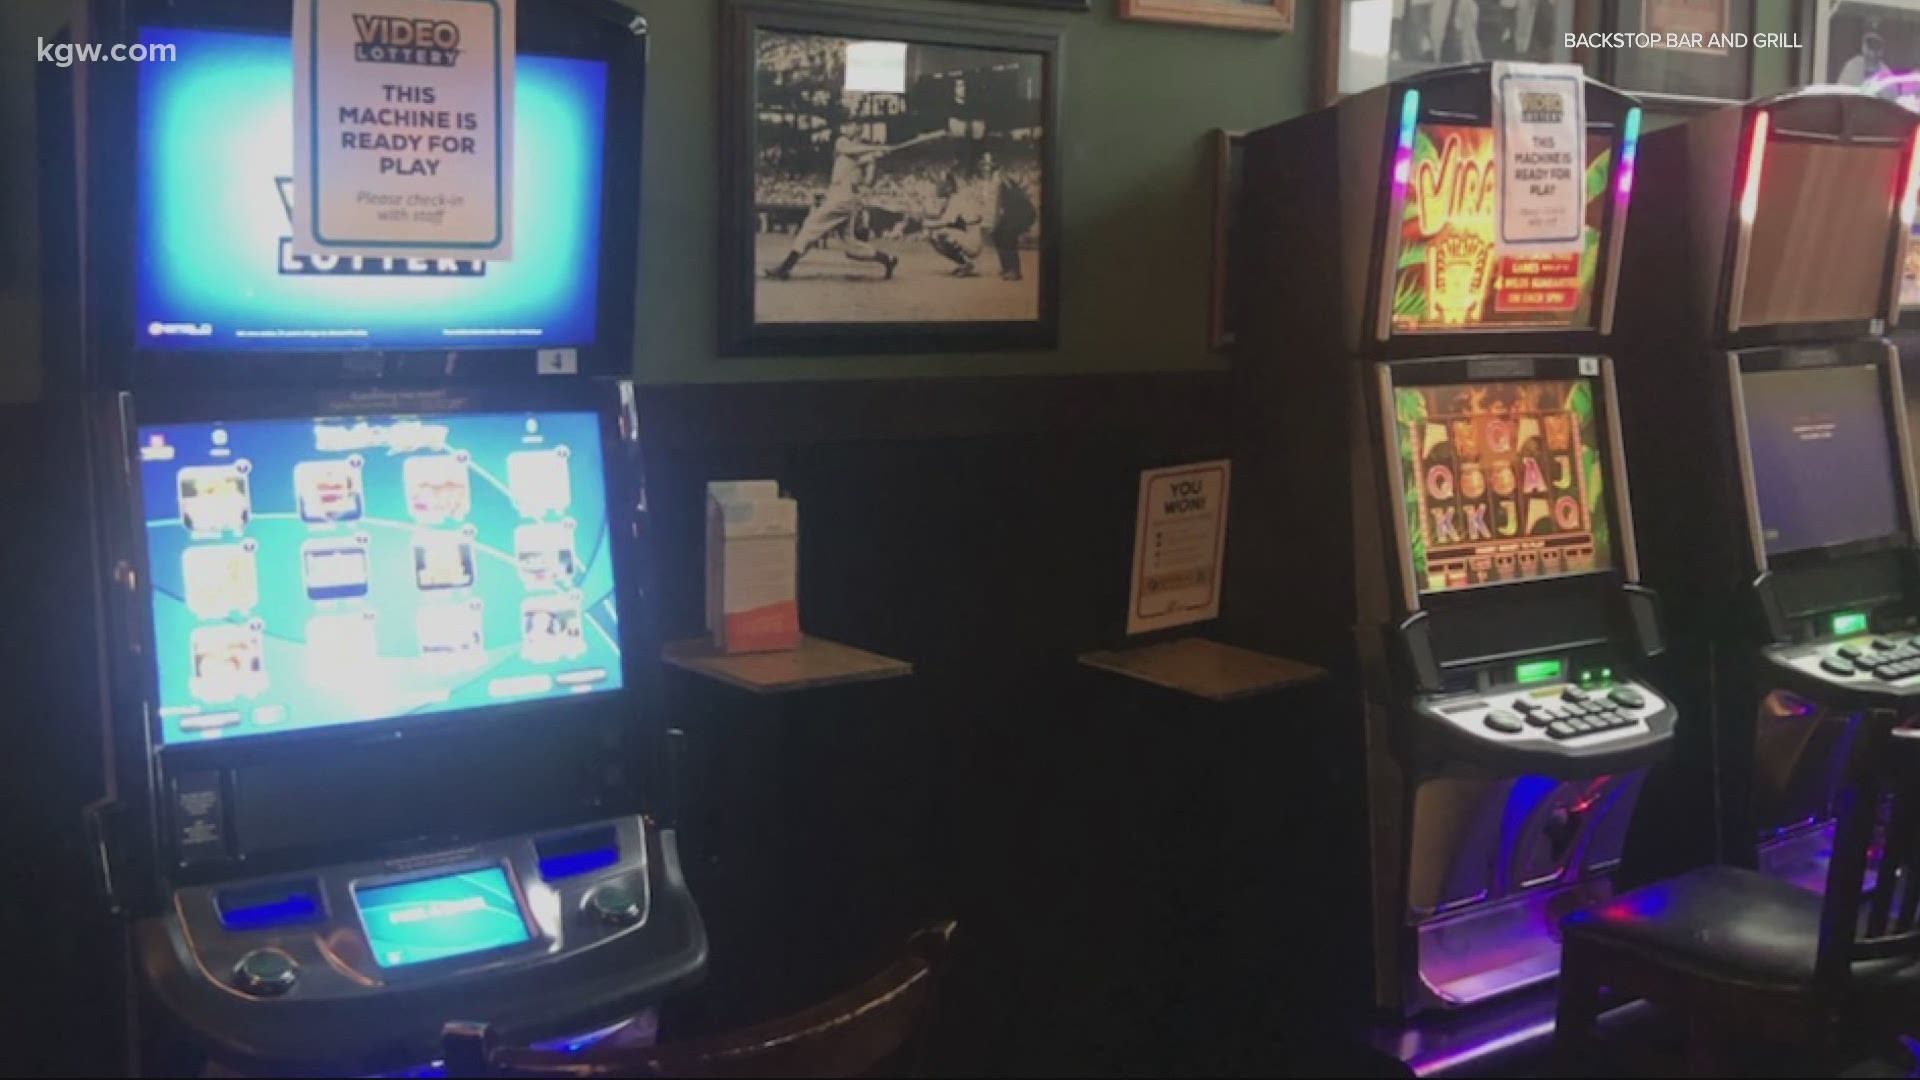 Oregon is loosening restrictions for some businesses, including allowing video lottery machines to be turned back on. As Devon Haskins reports, not everyone’s excite